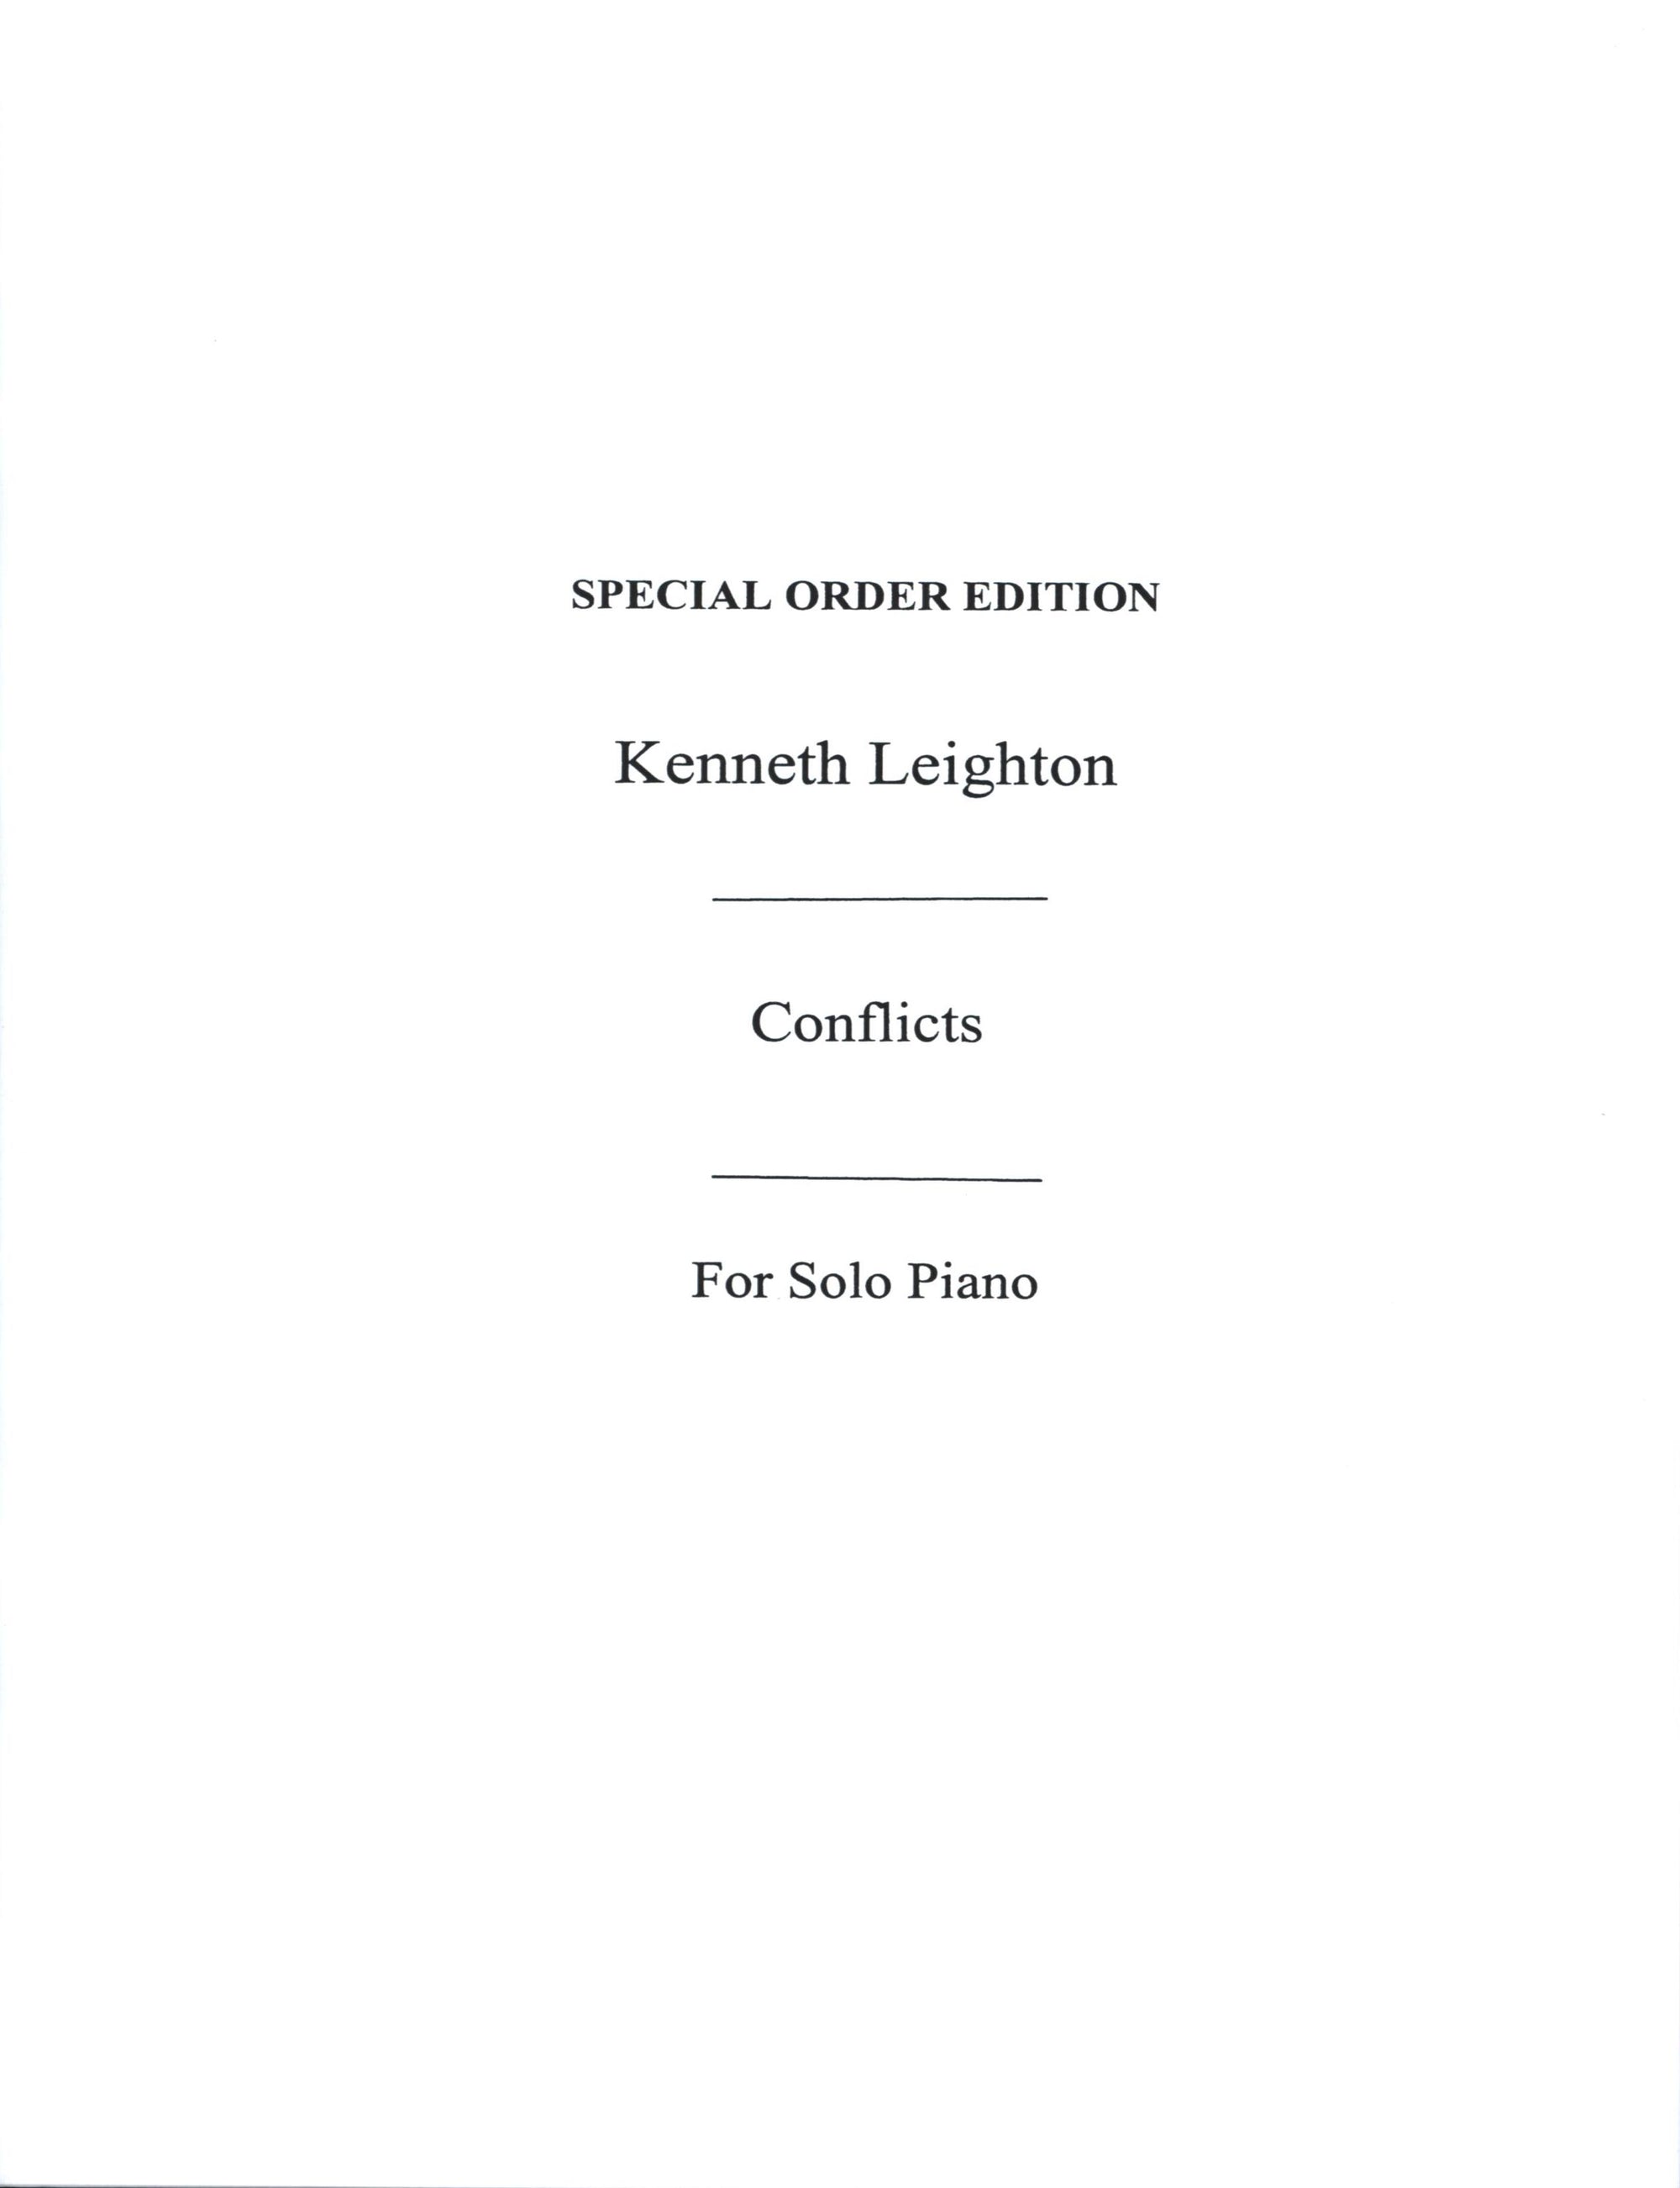 Leighton: Conflicts, Op. 51